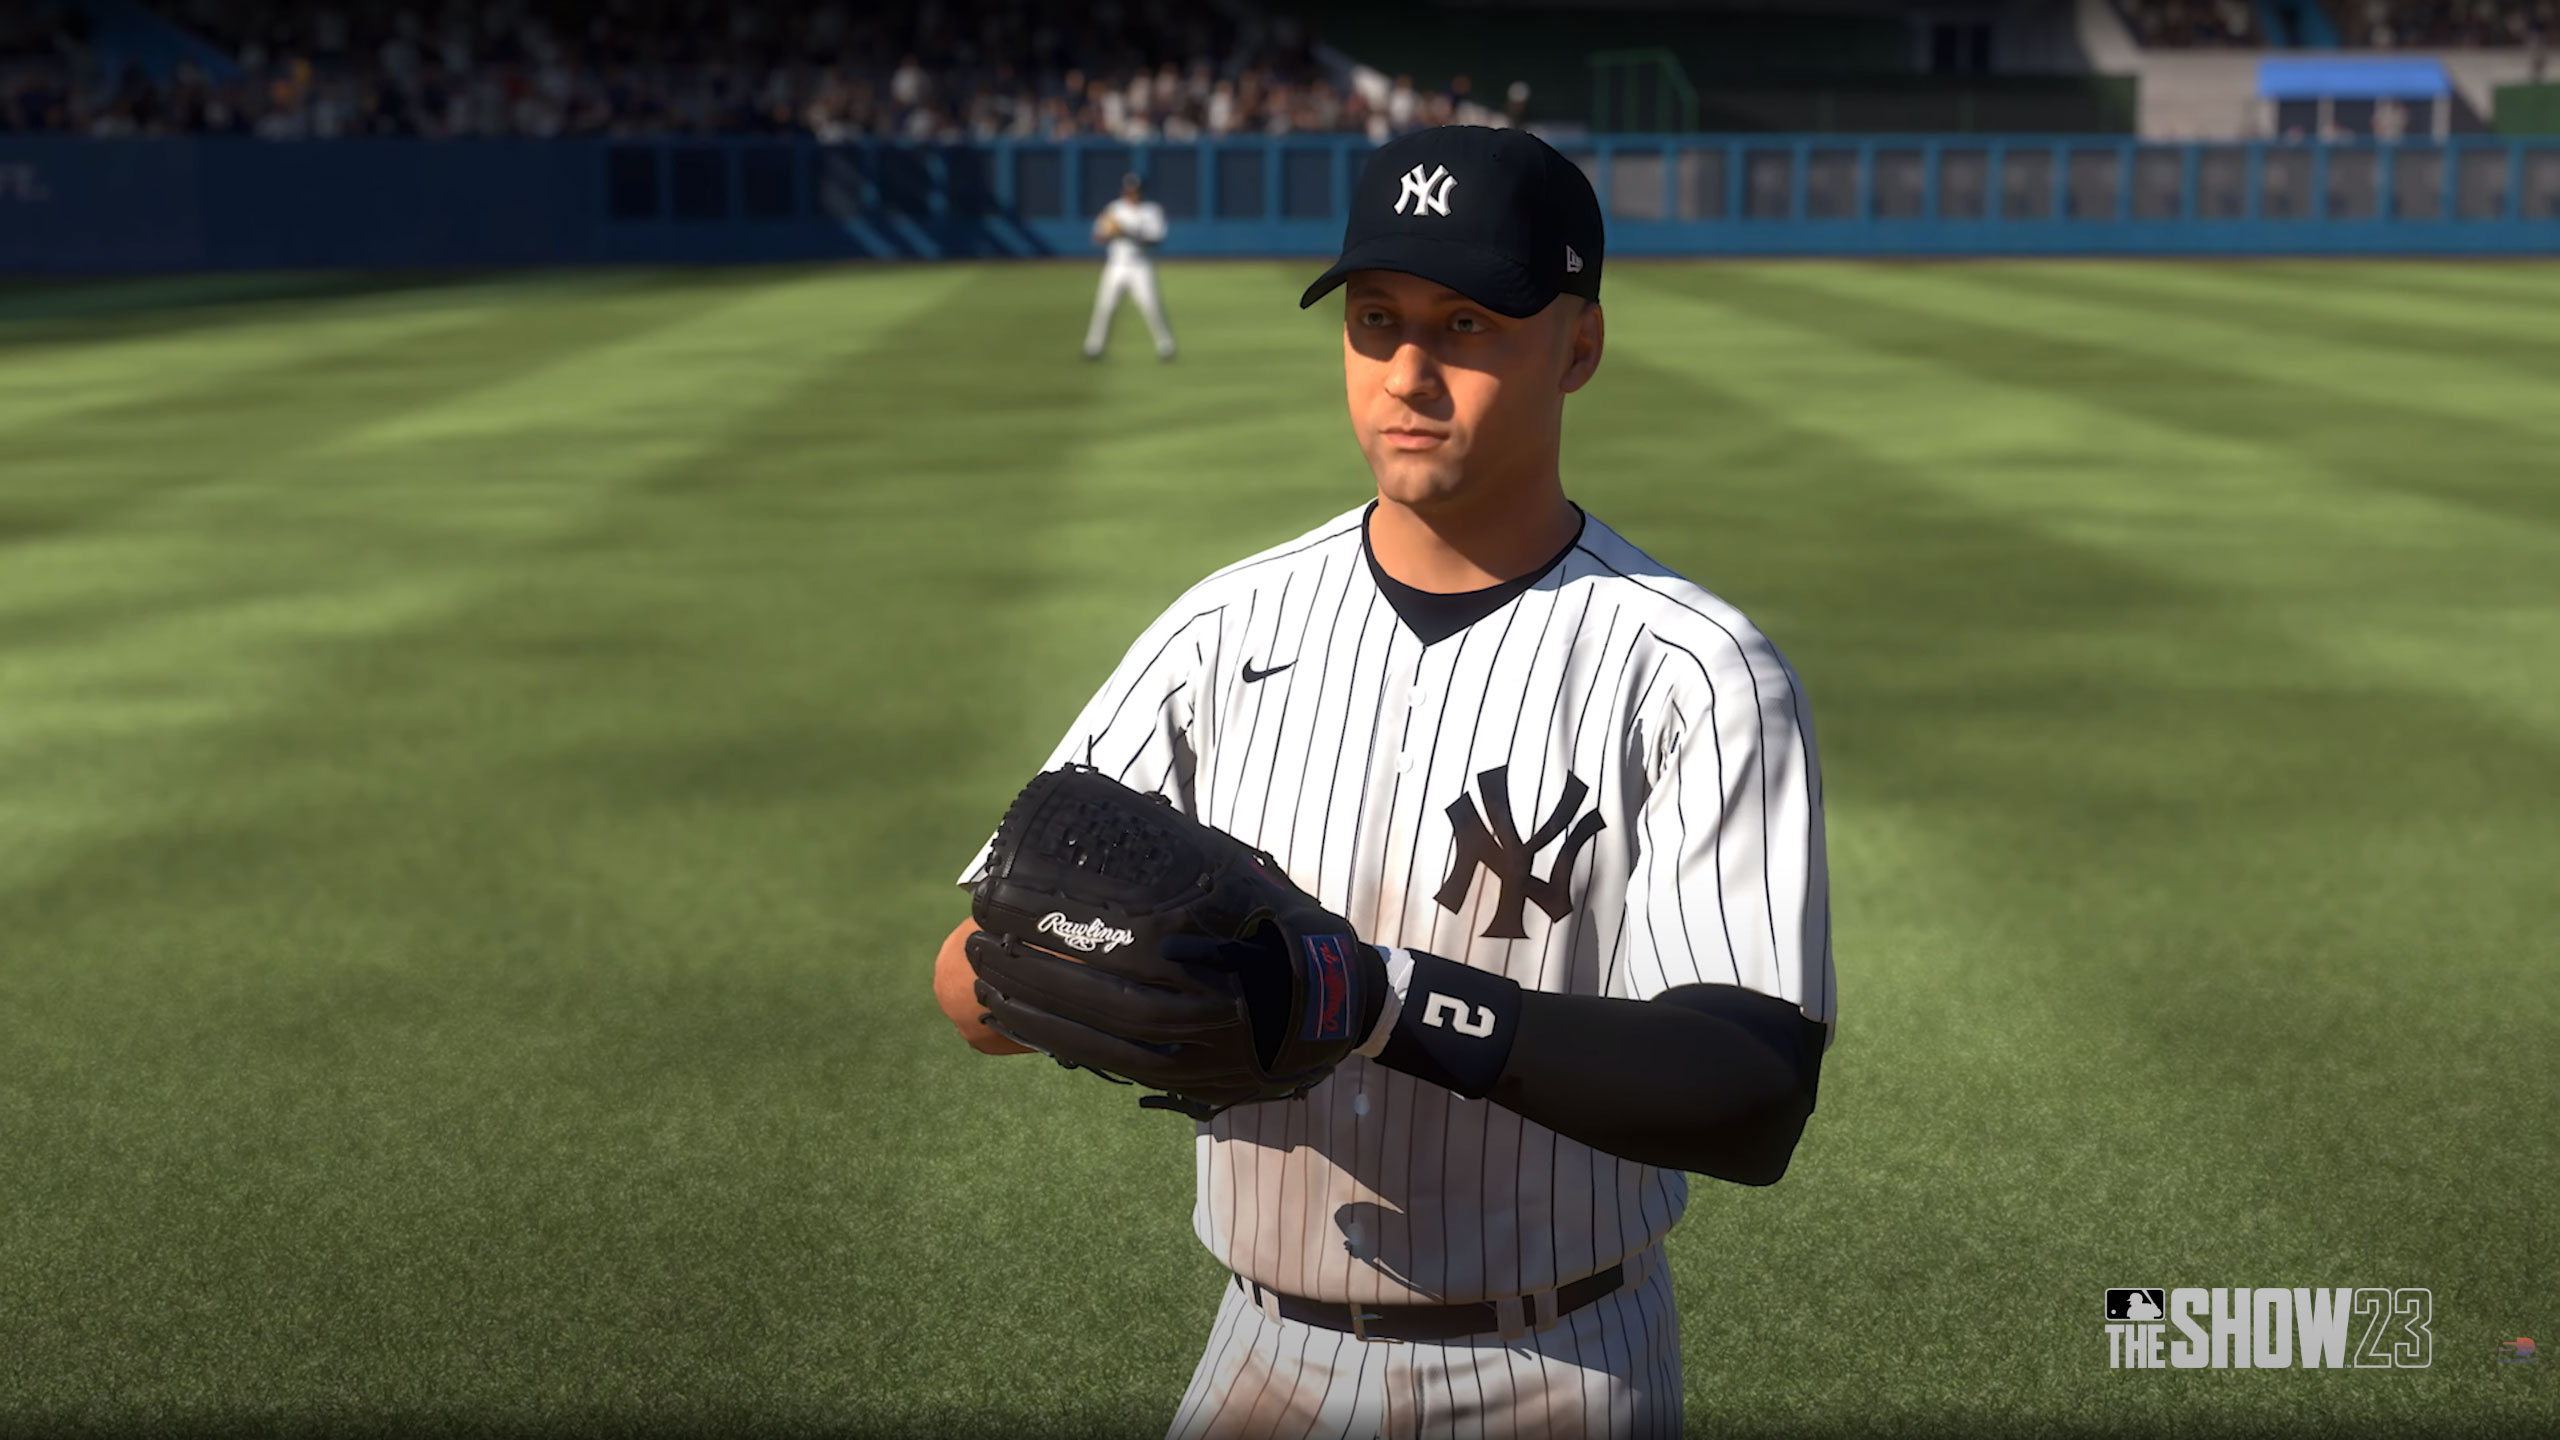 MLB The Show 23 Screenshots Tracker (Updated). MLBtheSHOW.io. The Show 23 News. The Show 23 Tips. The Show 23 Tips. The Show 23 Gameplay. The Show 23 Release Date. The Show 23 New Features